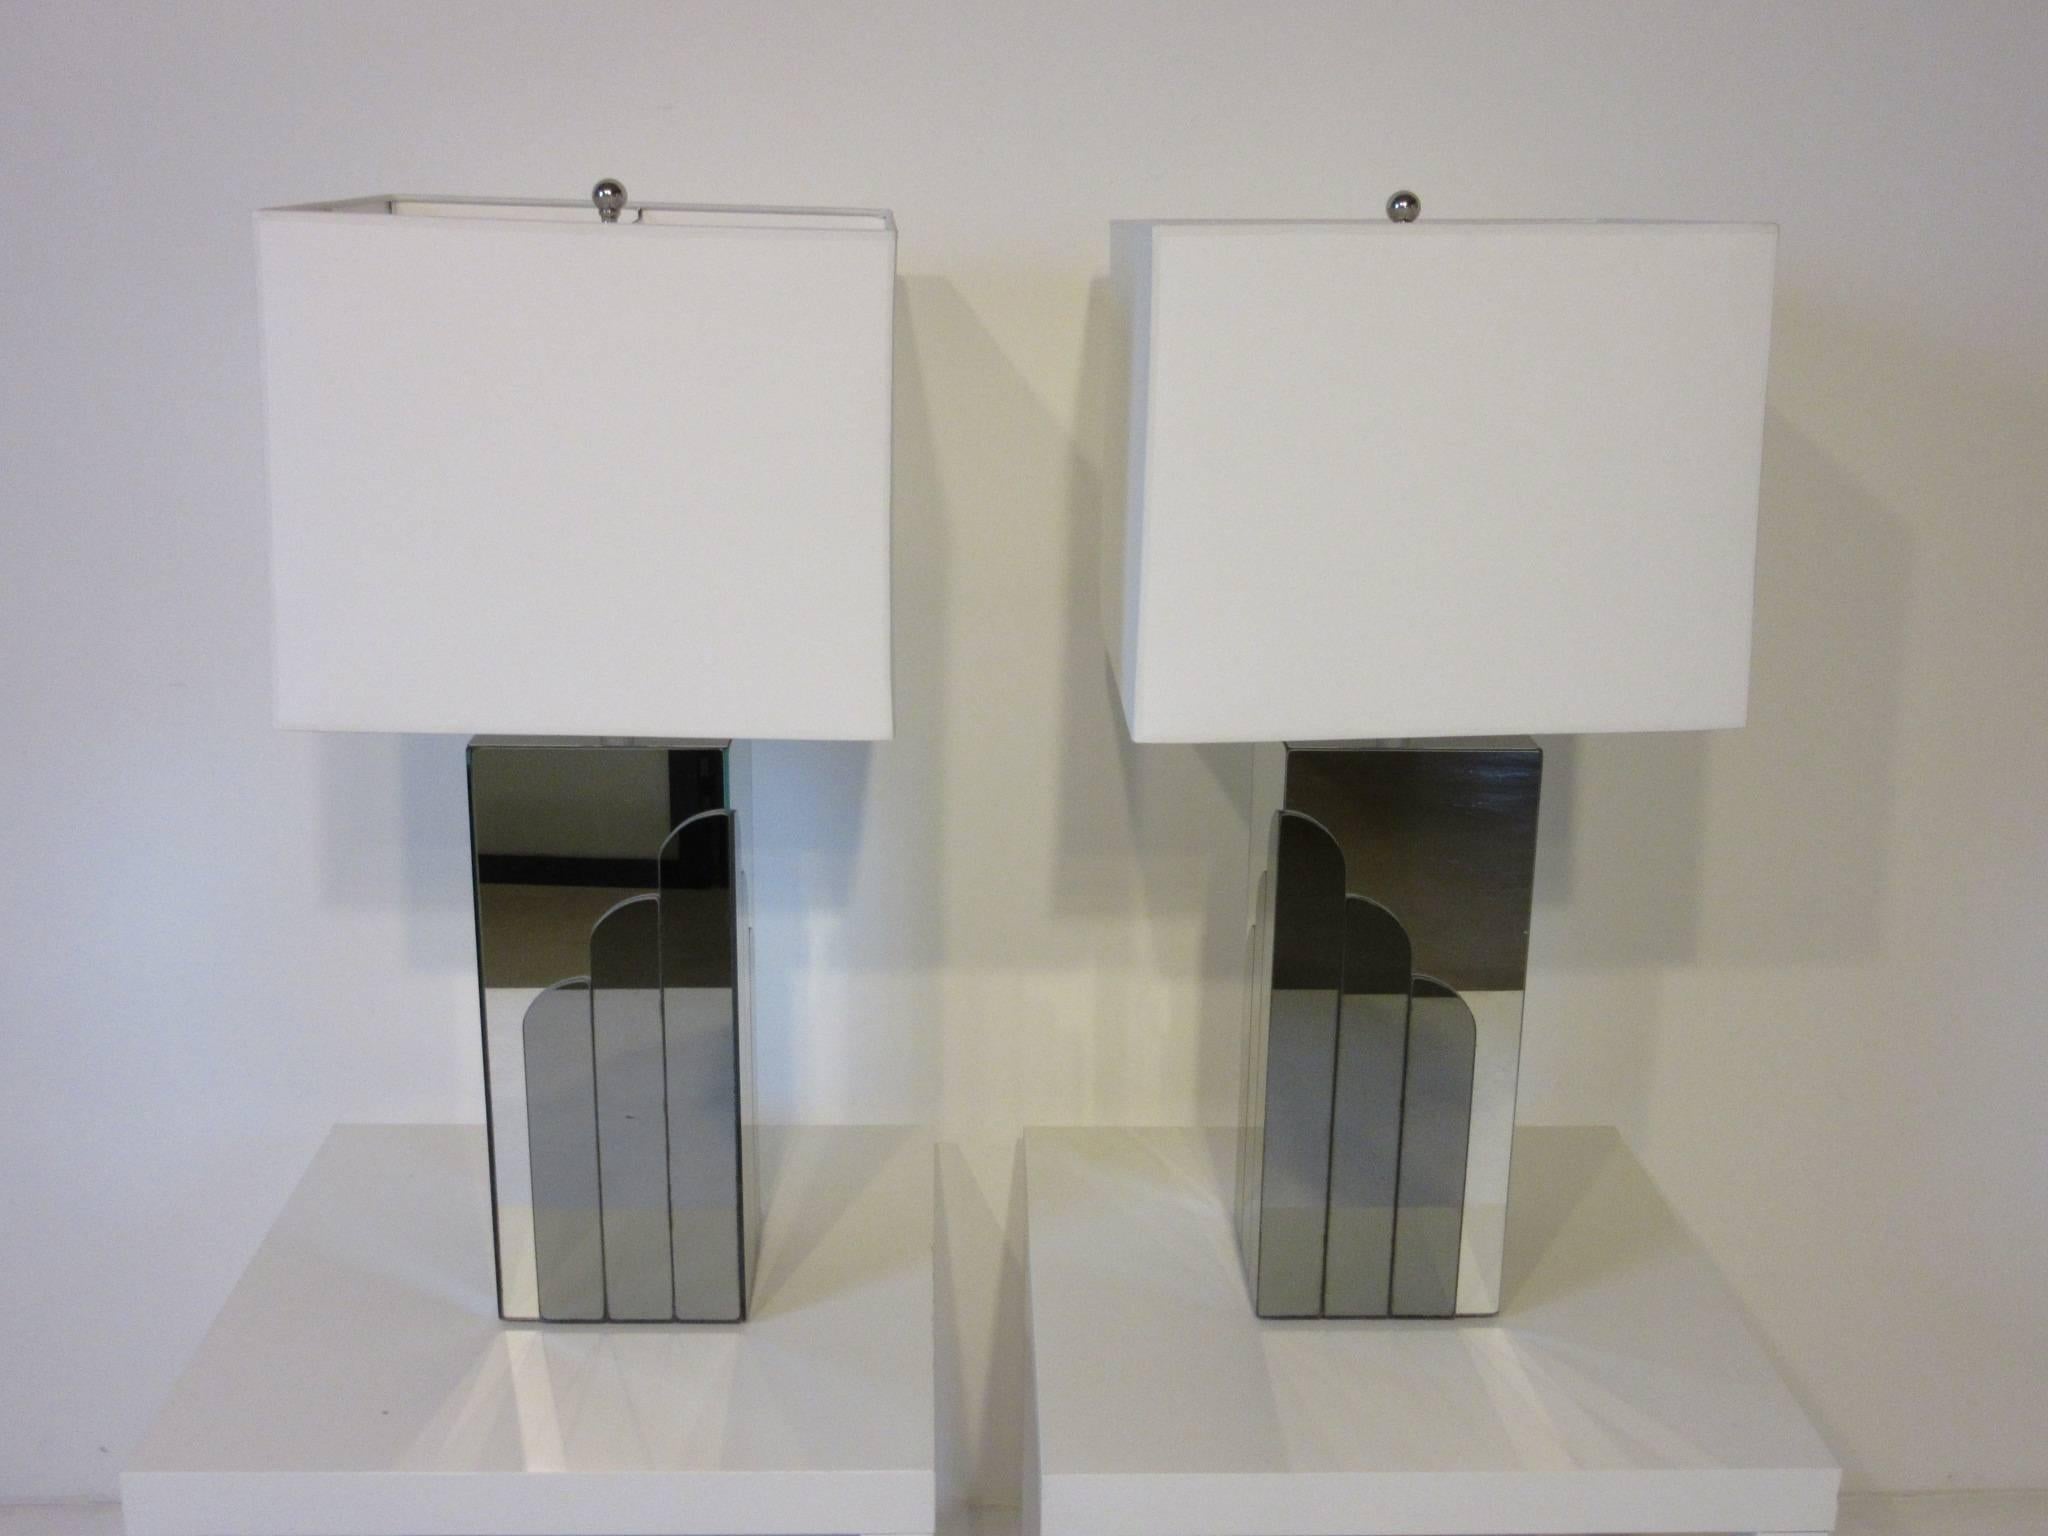 Glamorous 1970's Pierre Cardin Styled Mirrored Table Lamps In Good Condition For Sale In Cincinnati, OH